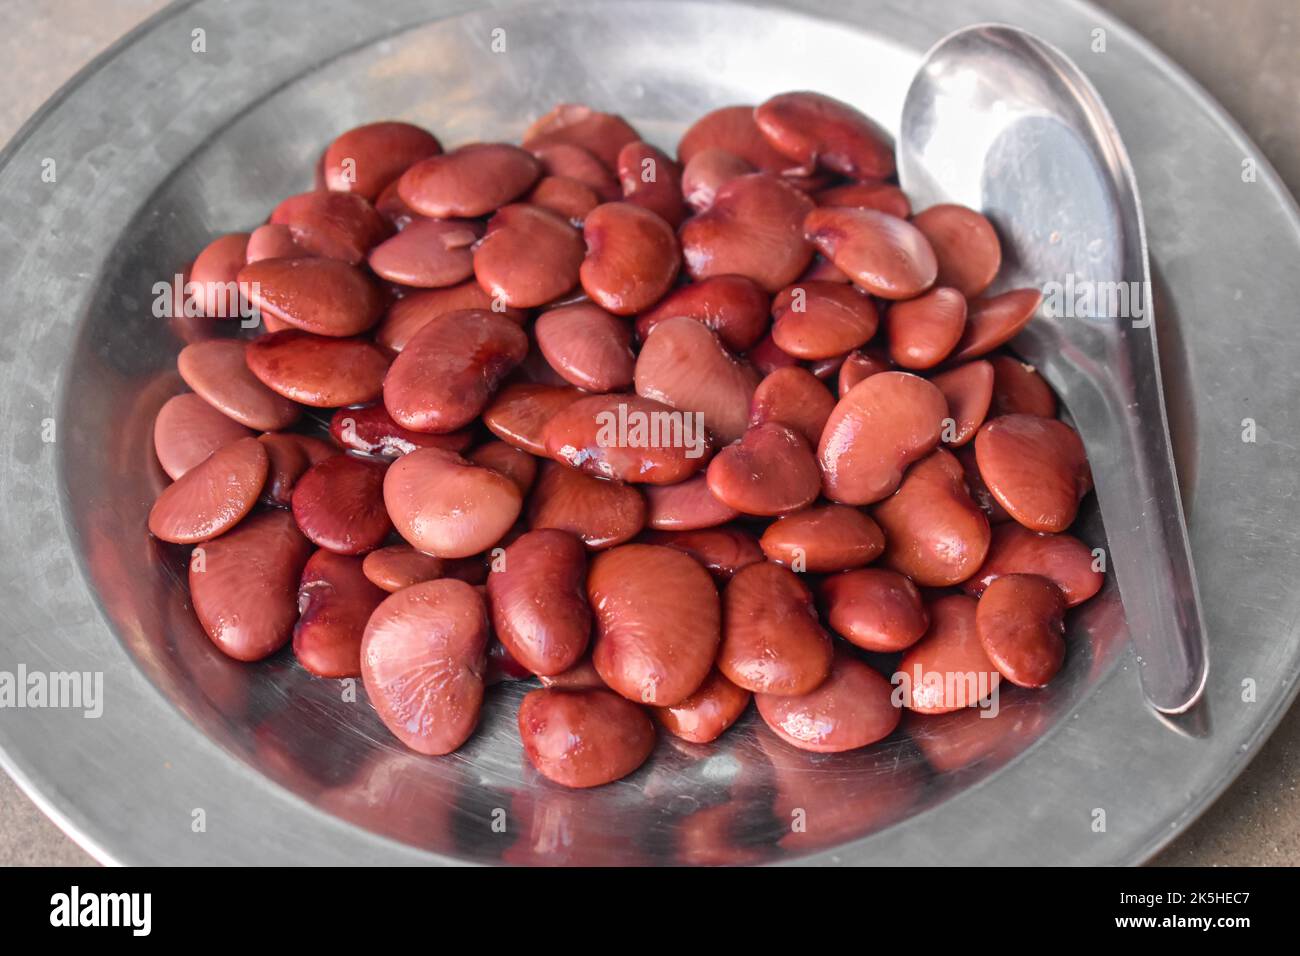 Boiled red flat beans. Protein rich food. Healthy diet menu. Closeup view. Stock Photo